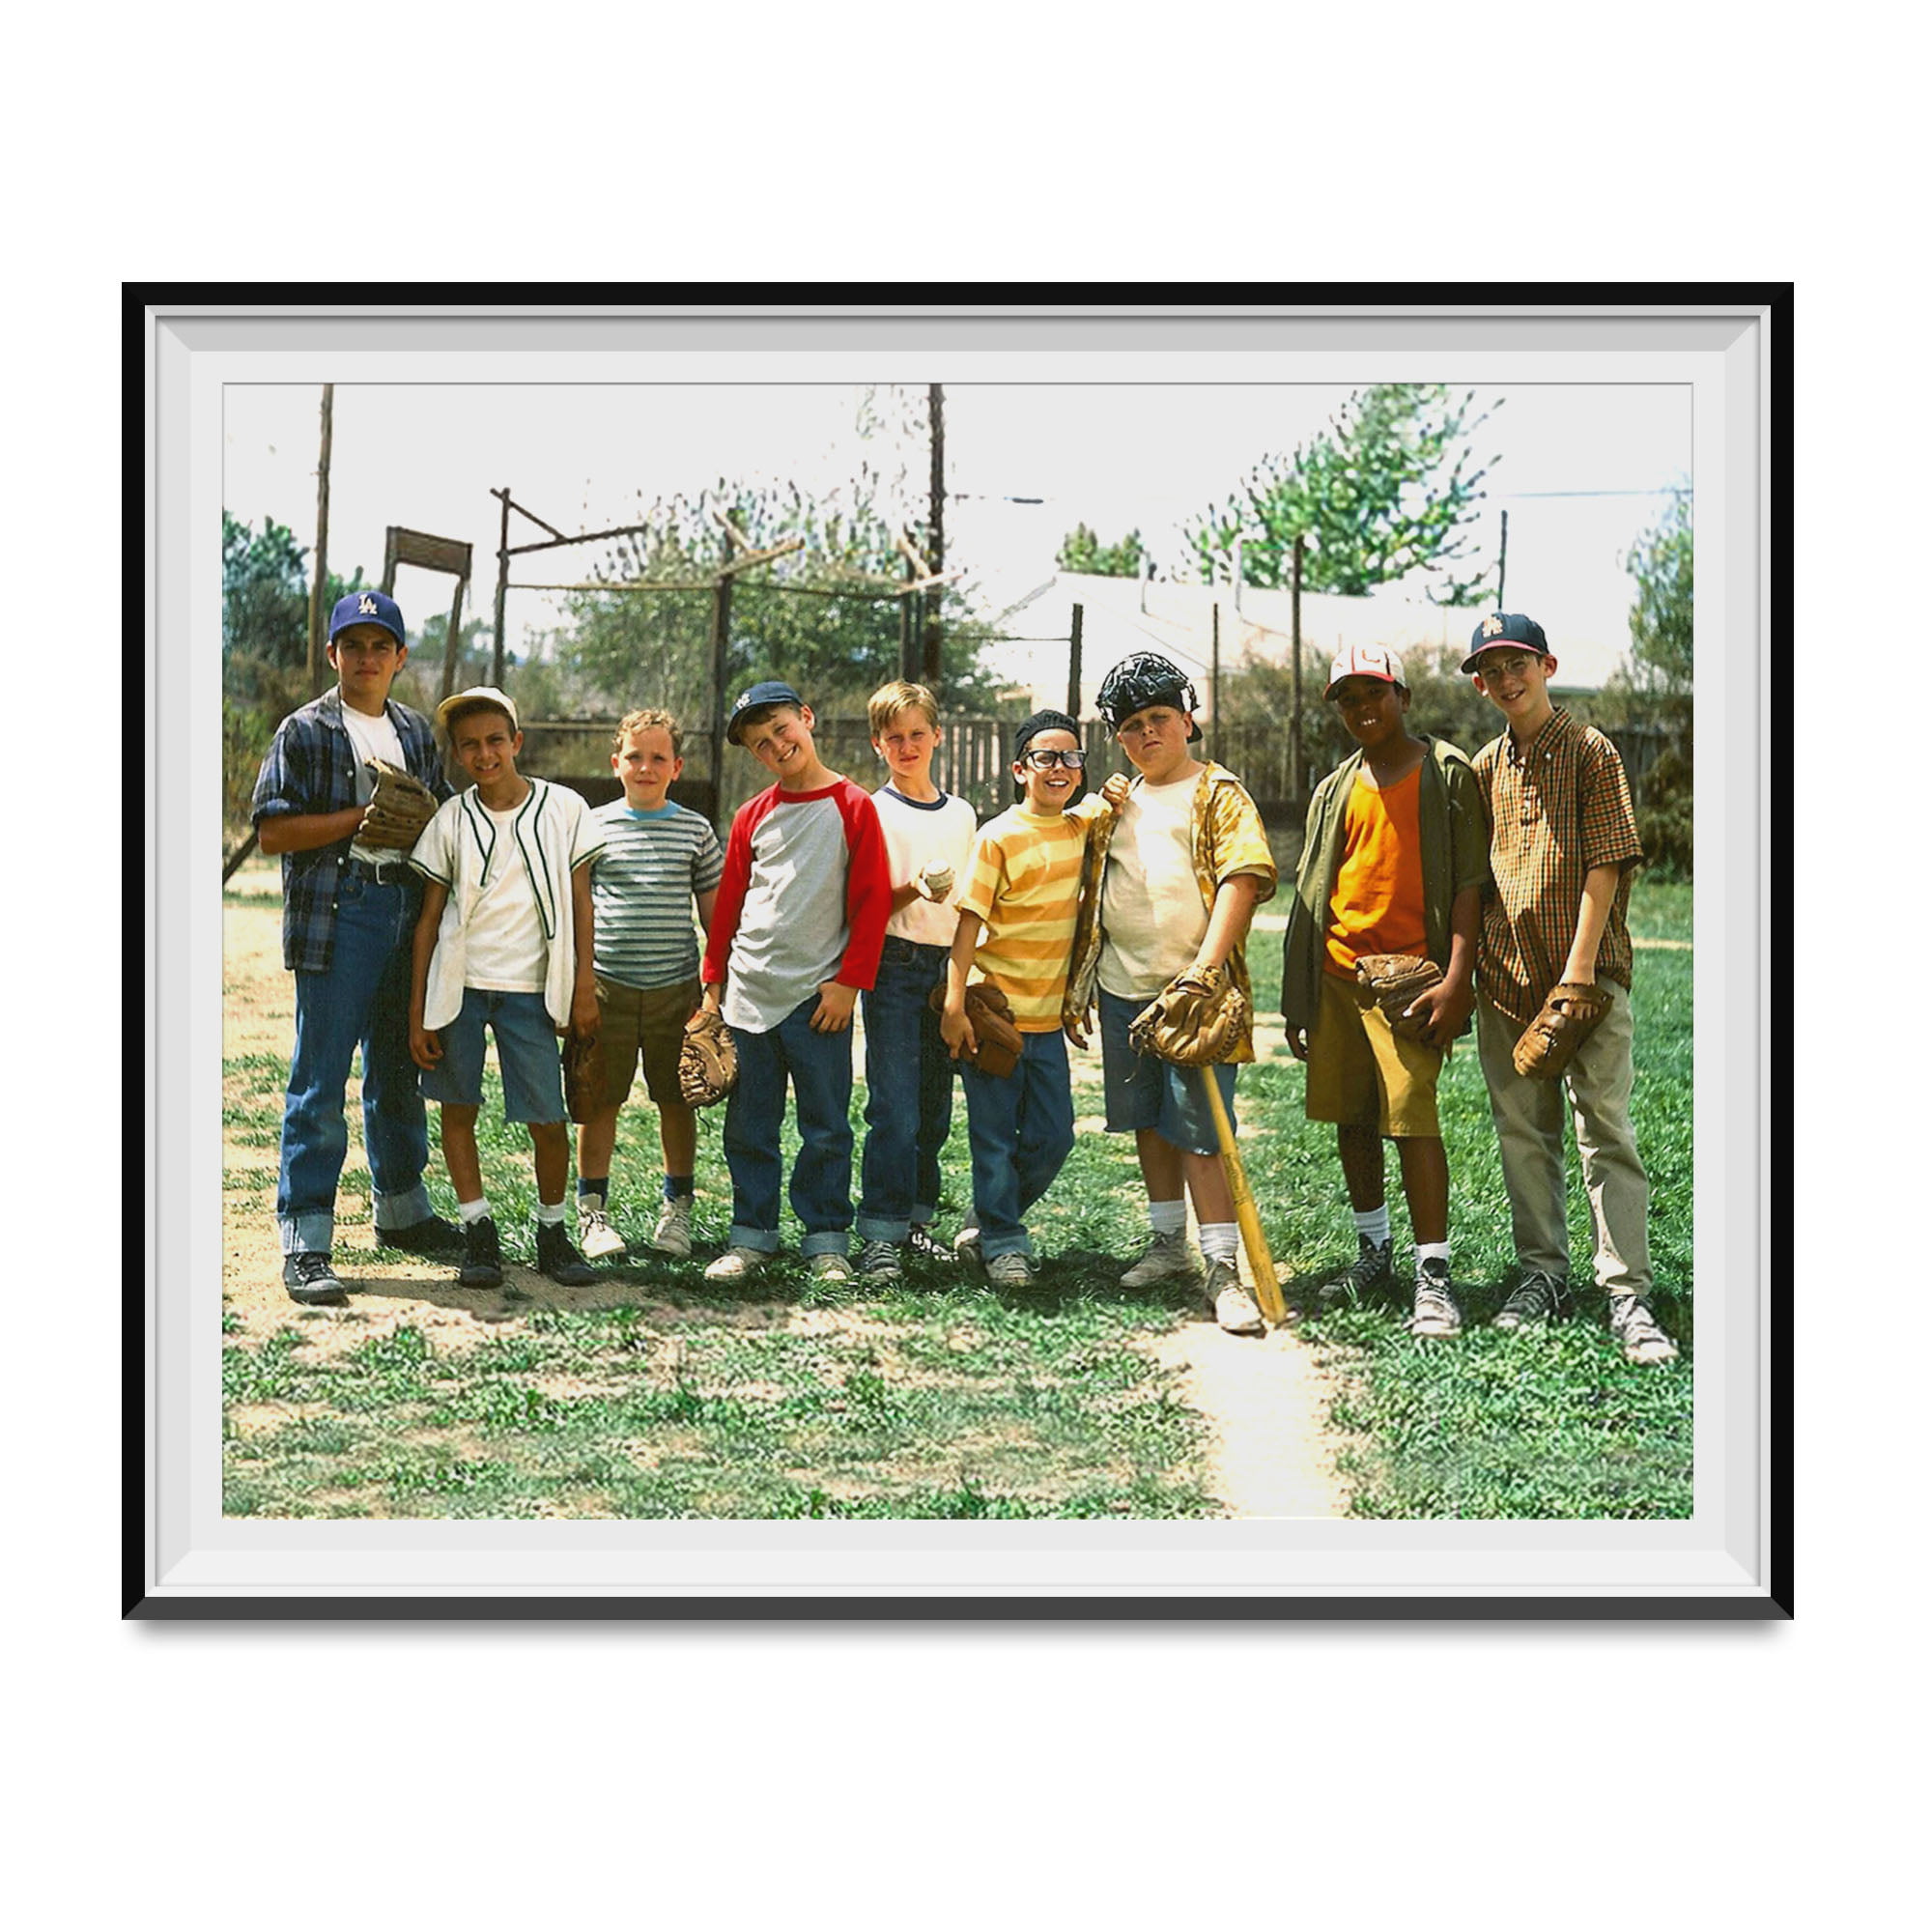 Scotty smalls broadcast booth ending photo the sandlot movie picture photograph